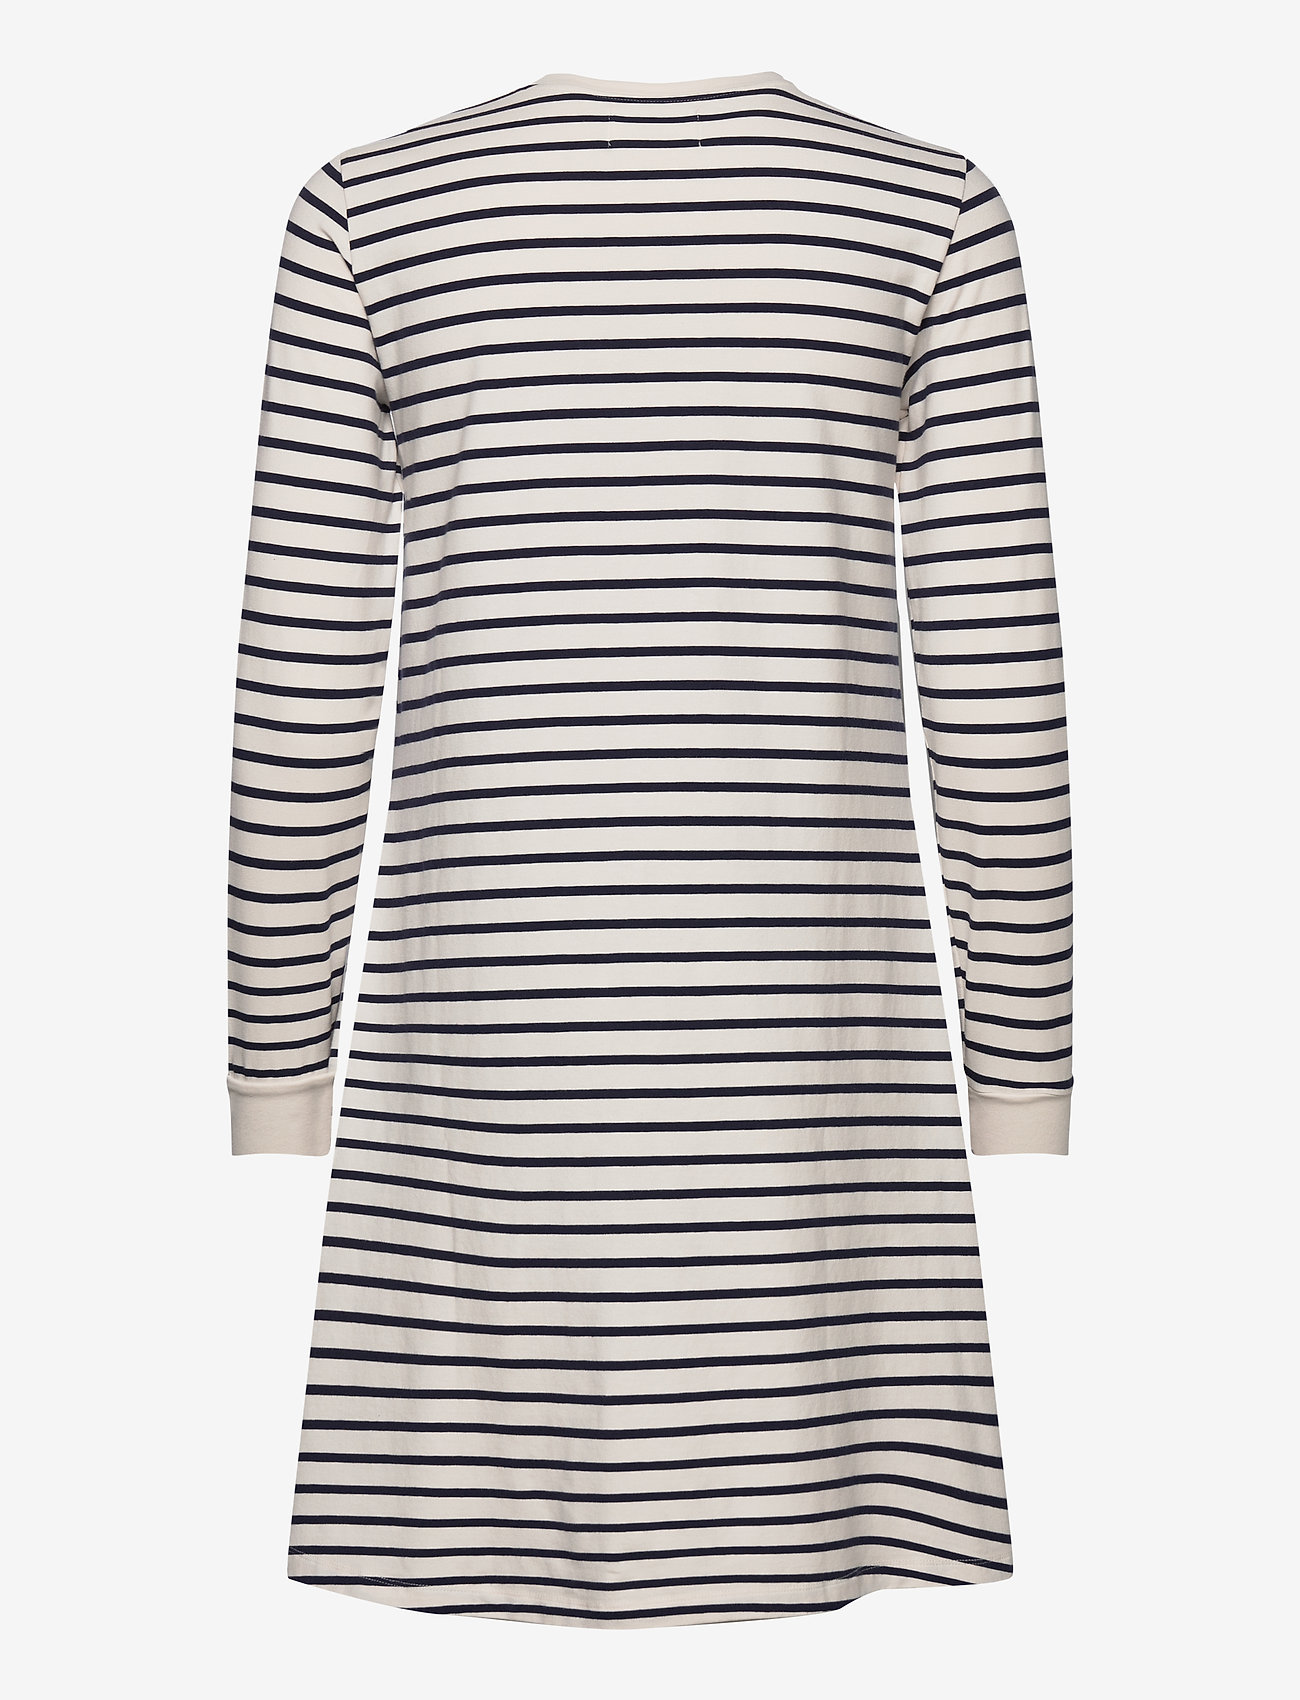 Double A by Wood Wood - Isa dress - dresskleidid - off-white/navy stripes - 1